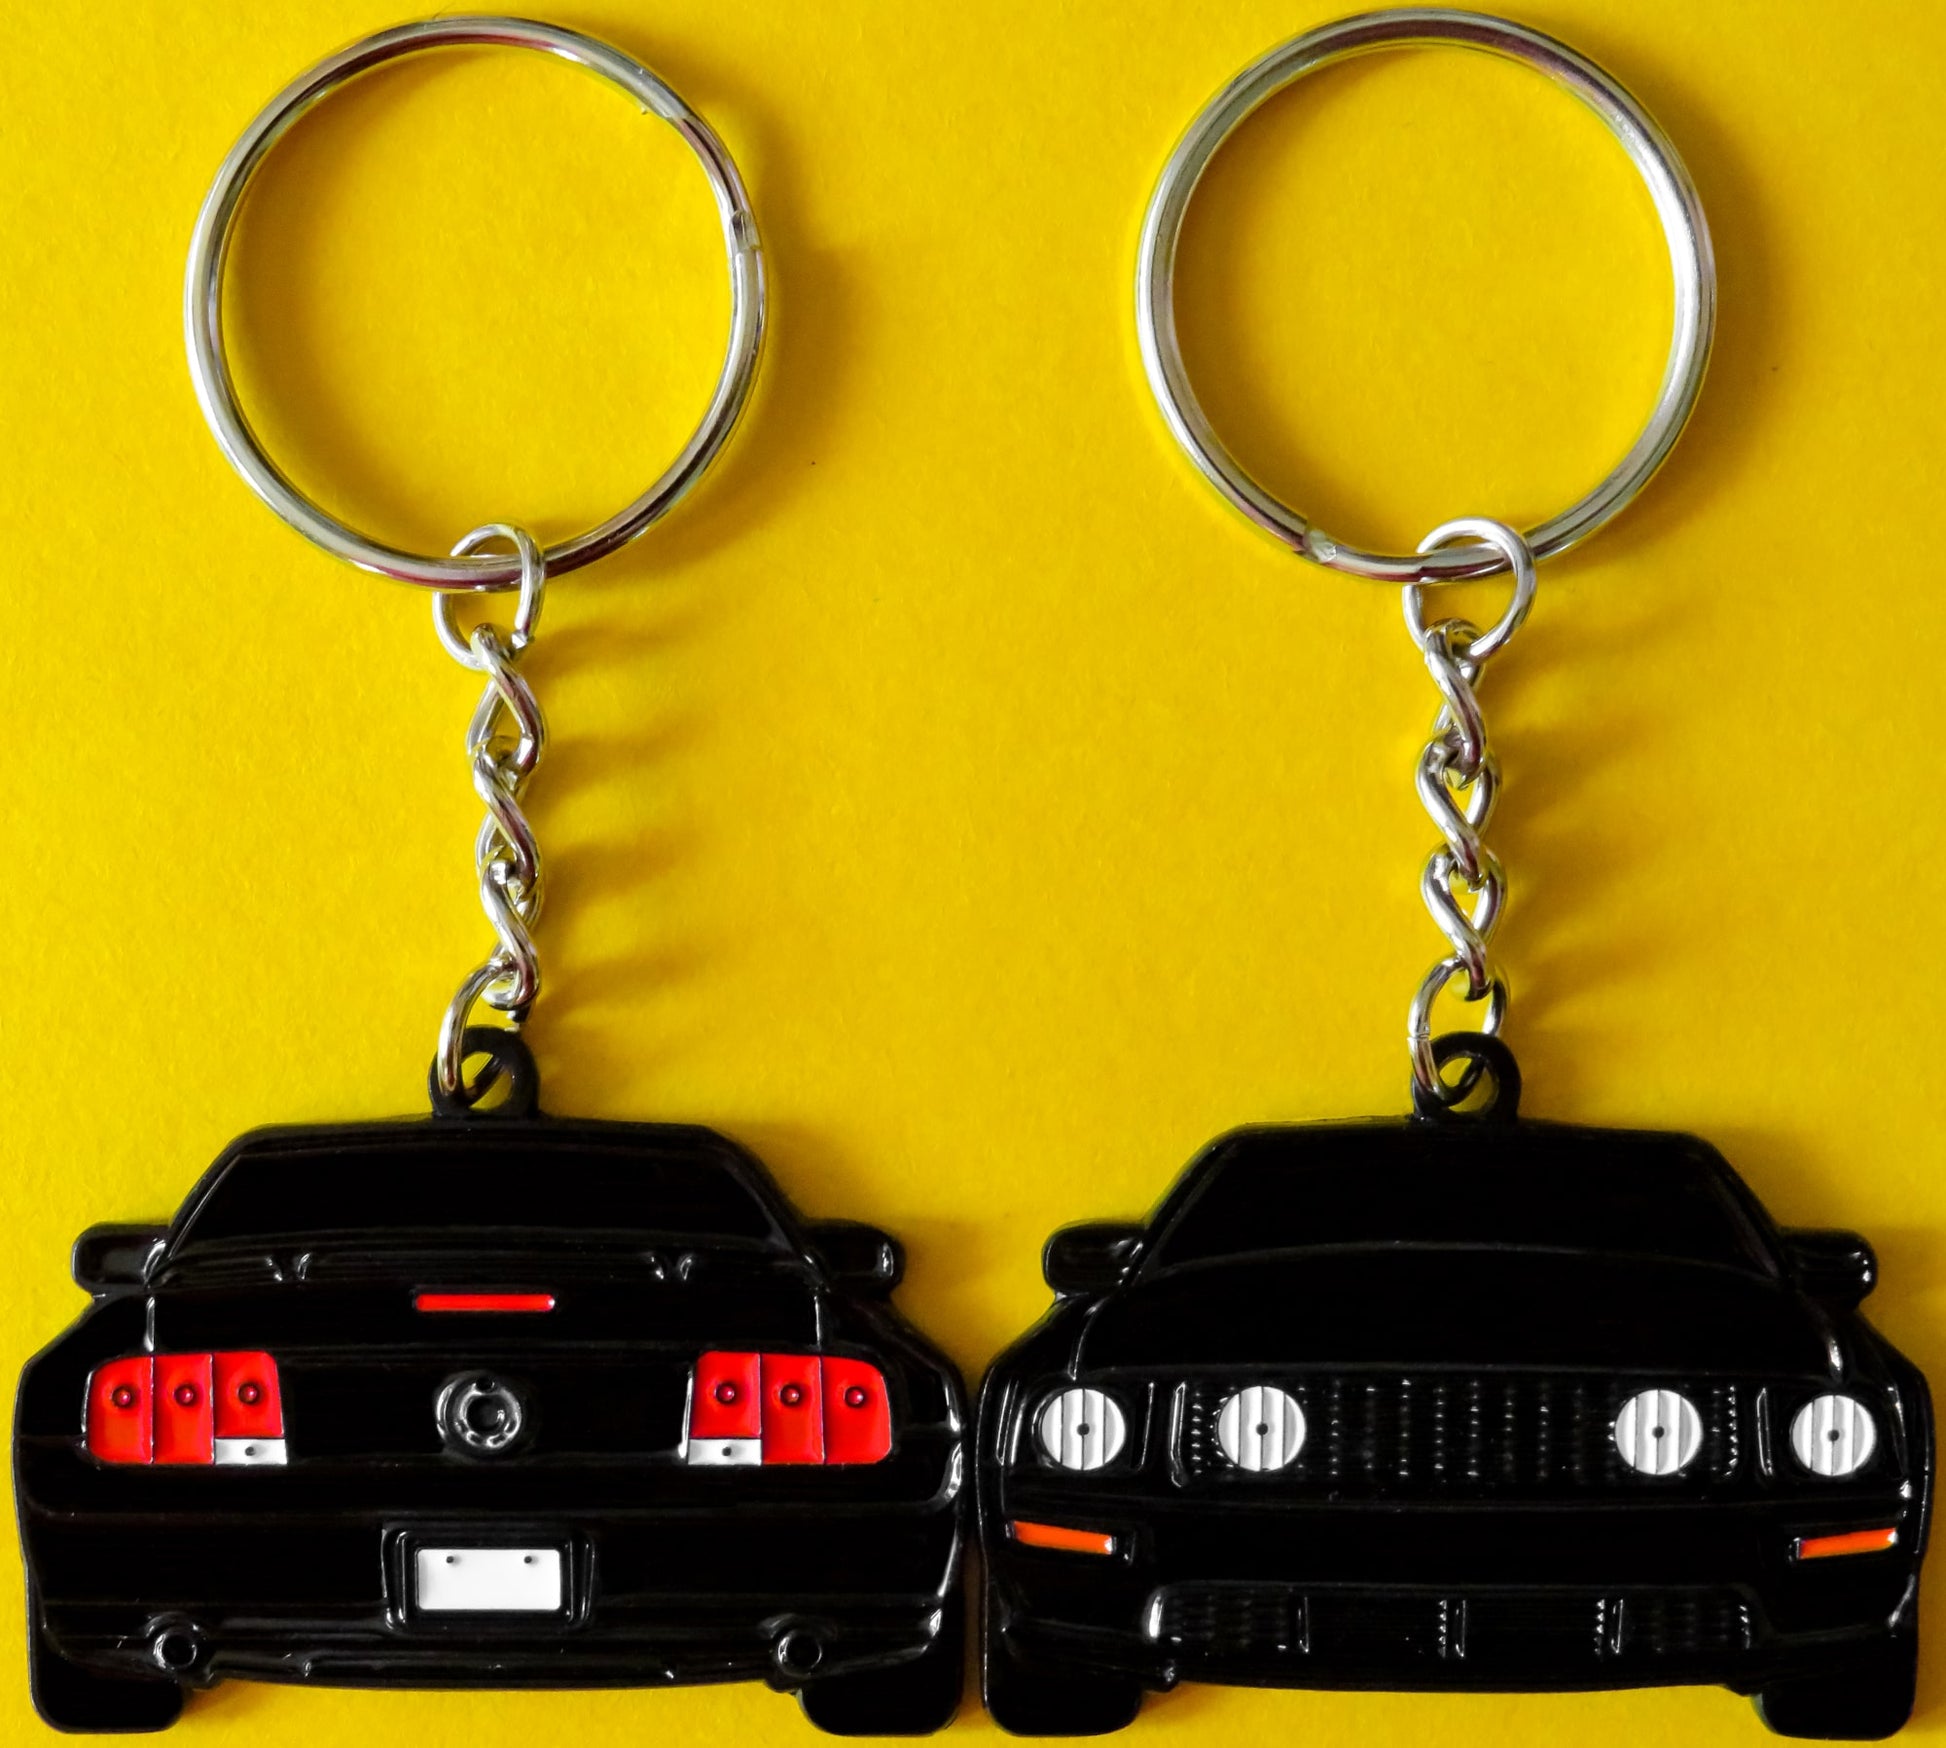 Keychain that fits on a key fob cover for a black Ford Mustang fifth generation S197 Stang lanyard for car guys and enthusiasts, girlfriend, boyfriend, father, dad, mother, mom, him, her, and more. Apparel and parts for muscle cars 2005 2006 2007 2008 2009 4.6